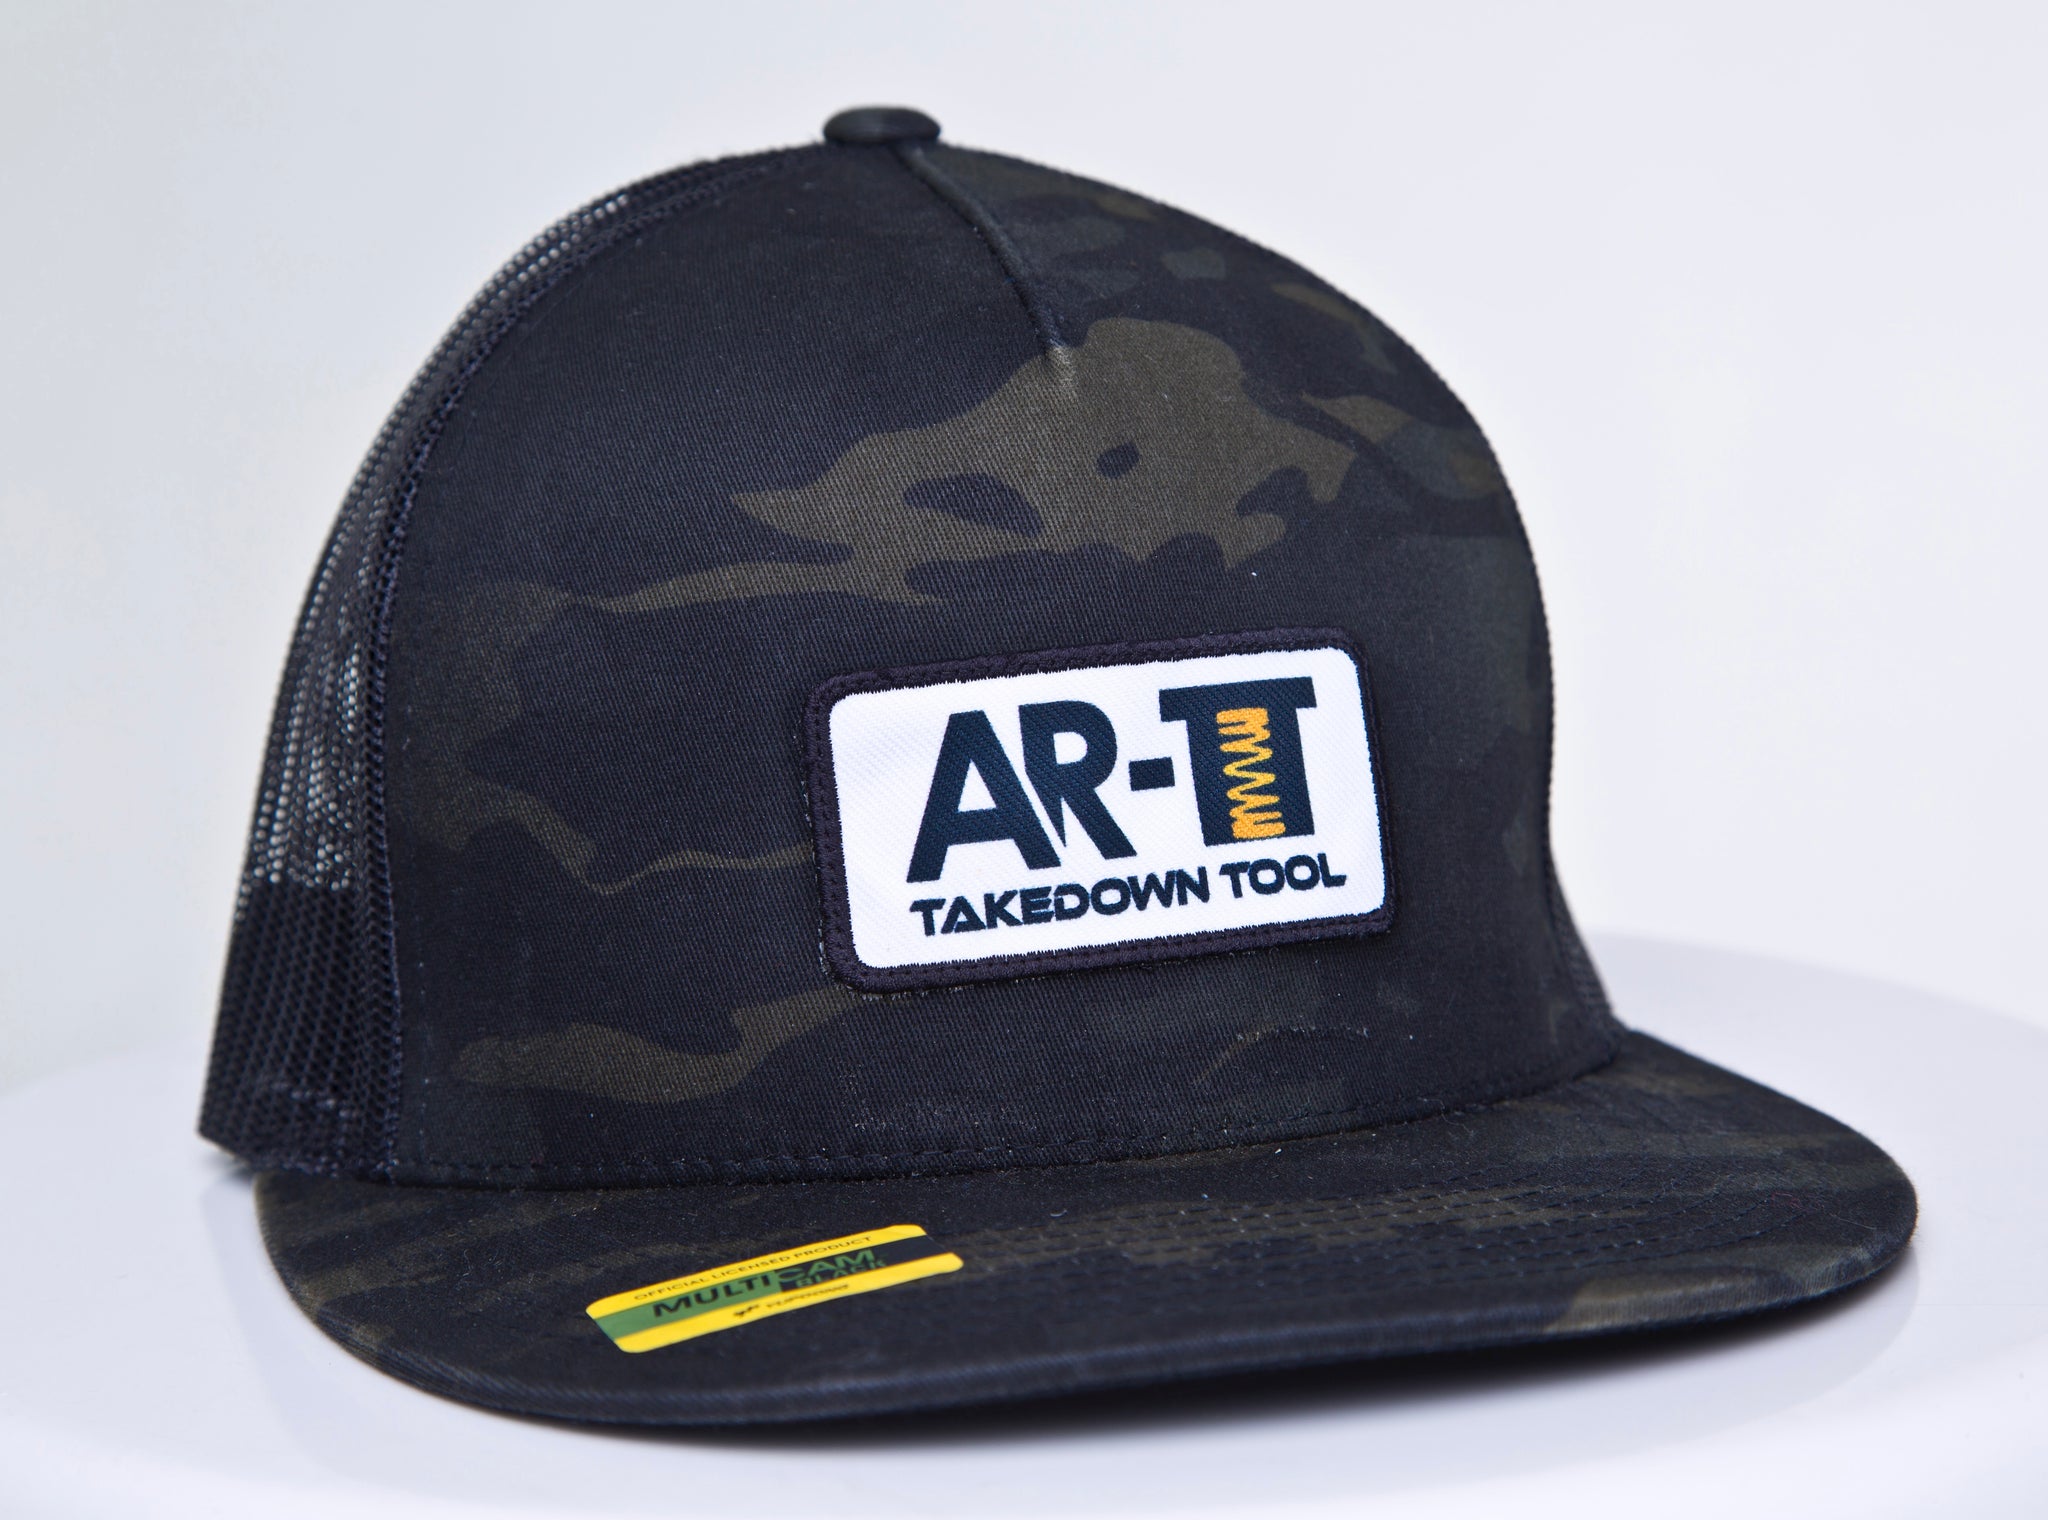 The AR-TT hat by GET SPRUNG Apparel & The Takedown tool - AR TakeDown Tool 